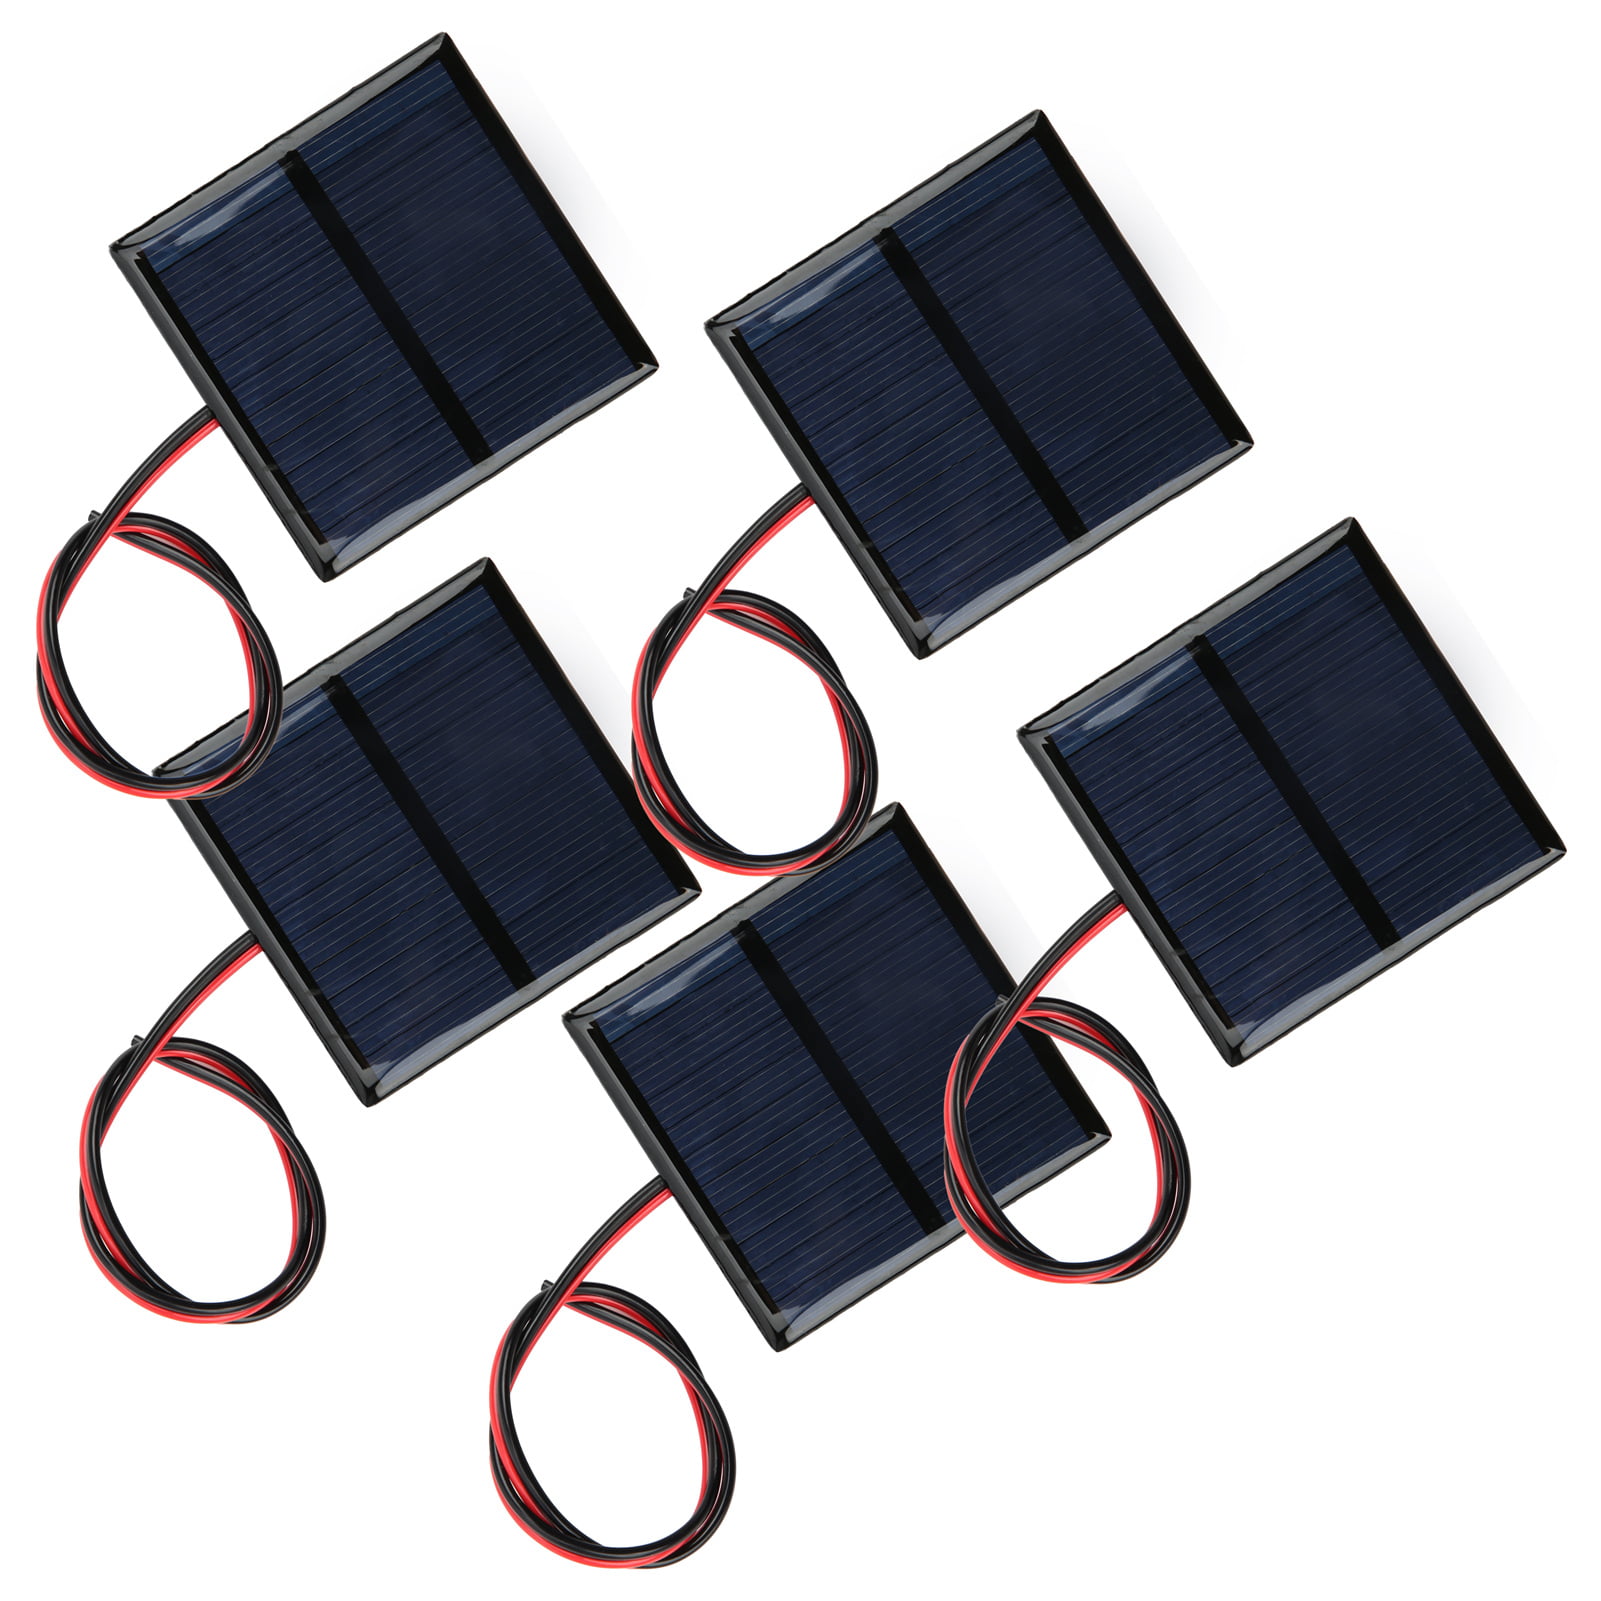 Details about   1.2W 6V Solar Panel With Mini USB Port Polycrystalline Silicon Solar Household 